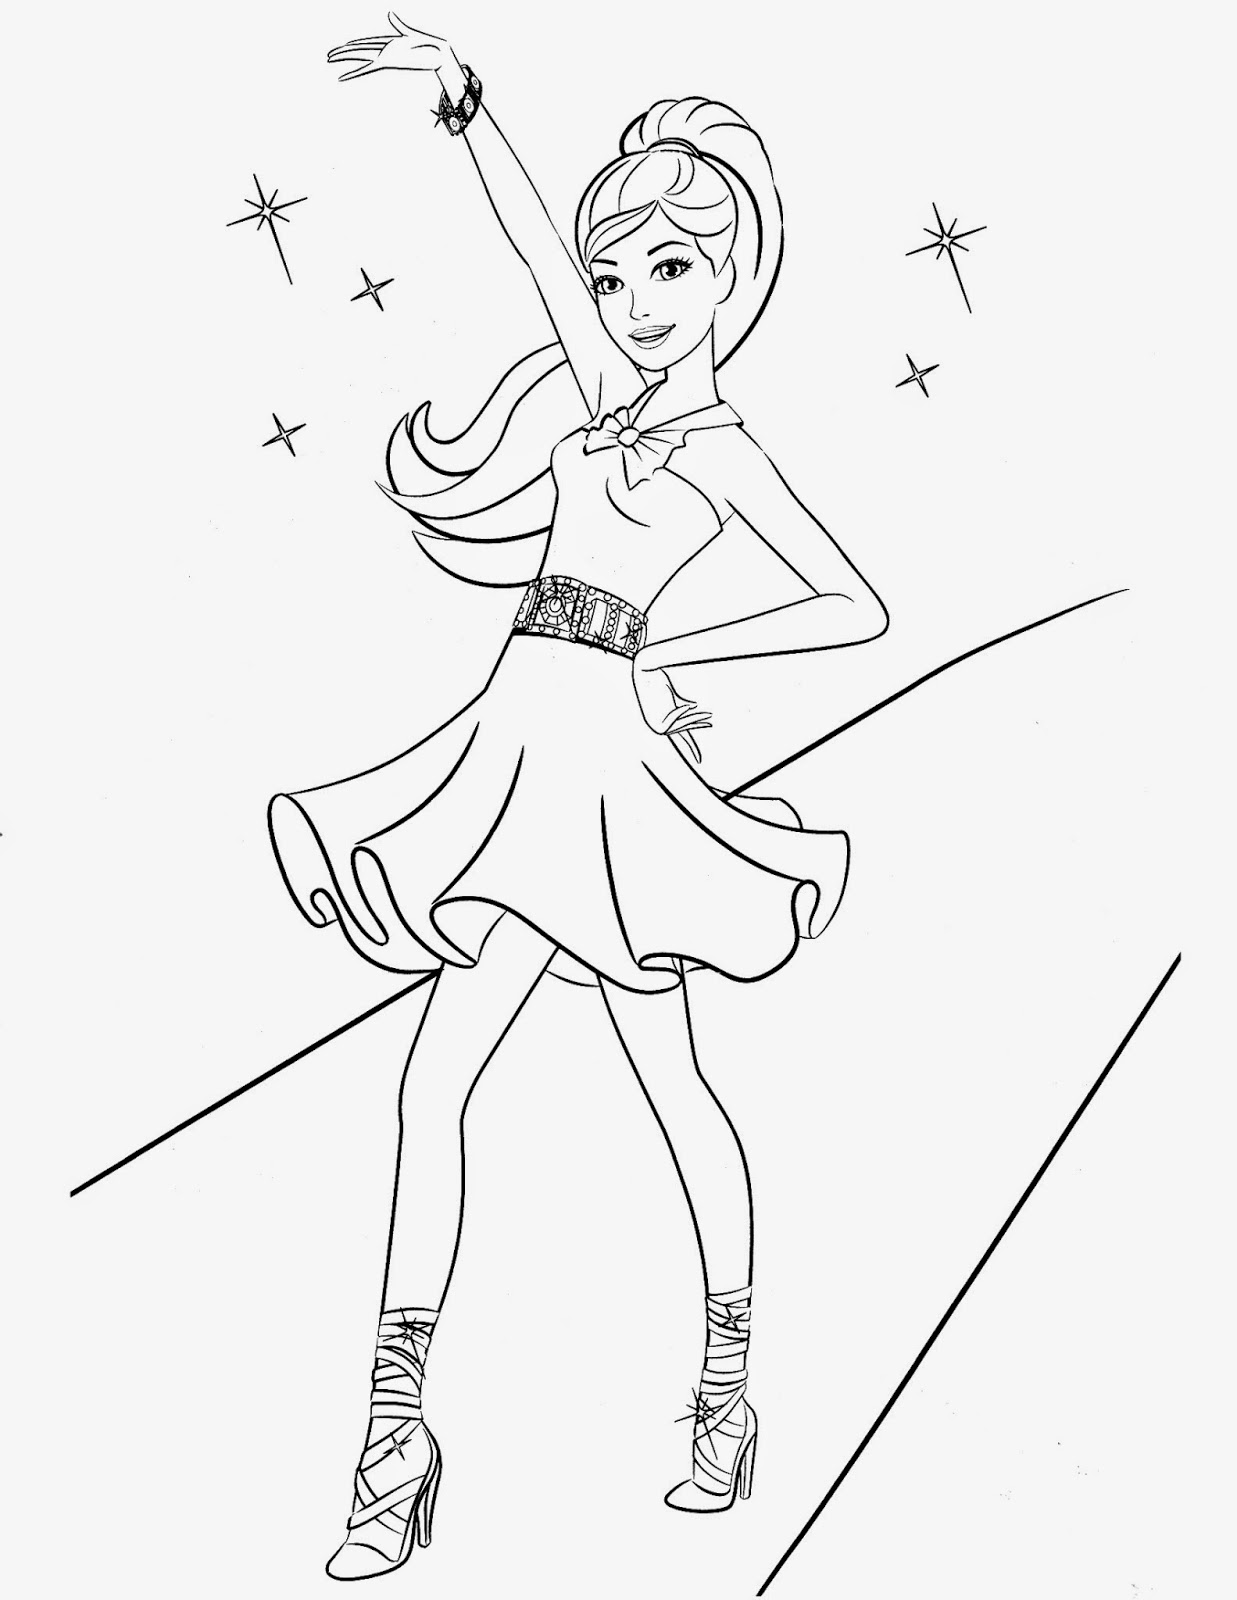 Barbie free printable coloring pages holiday.filminspector.com